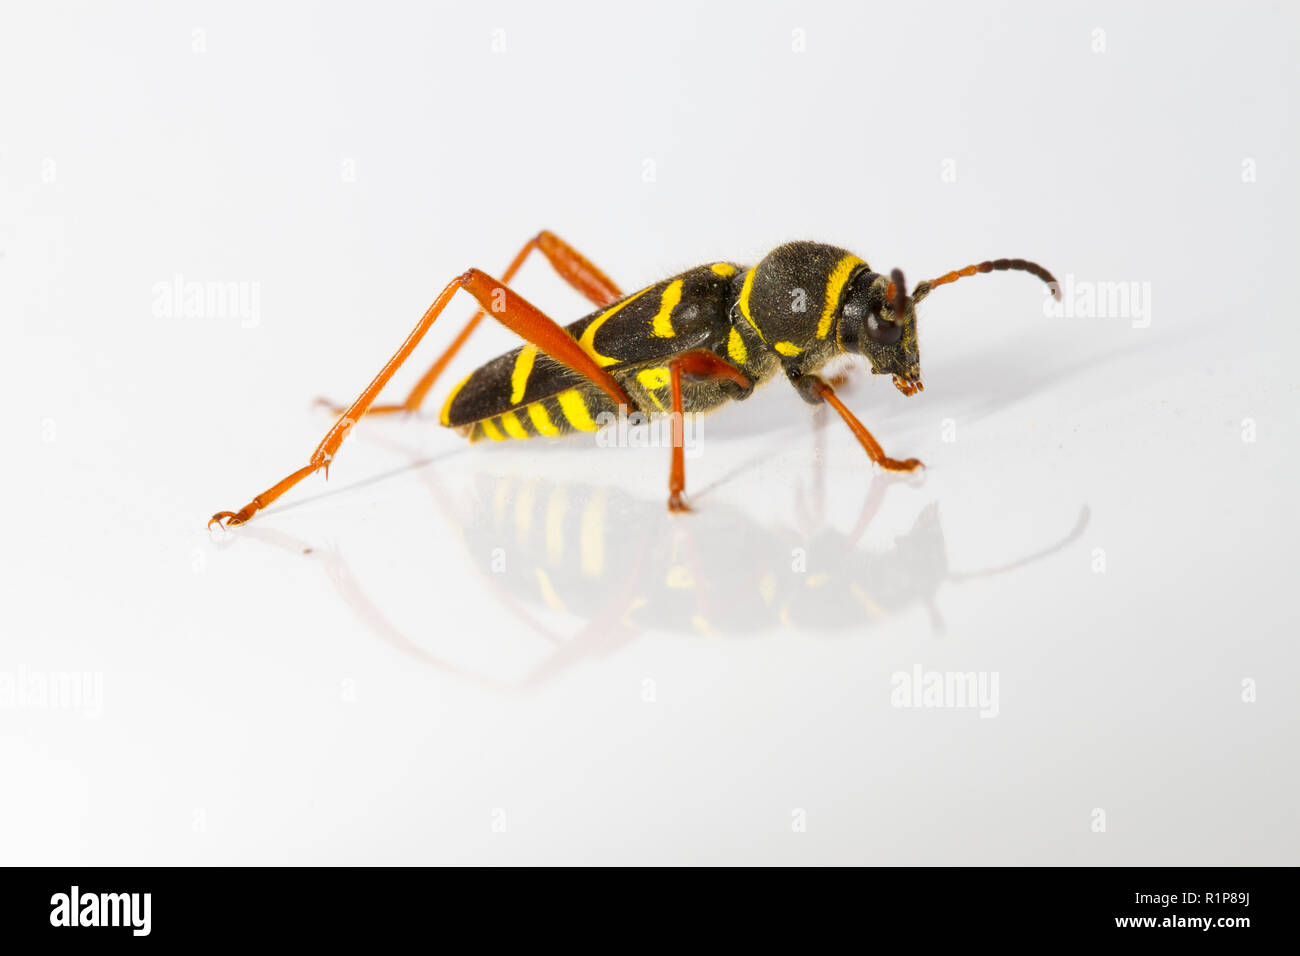 Wasp beetle (Clytus arietis) adult, live insect photographed on a white background. Powys, Wales. June. Stock Photo